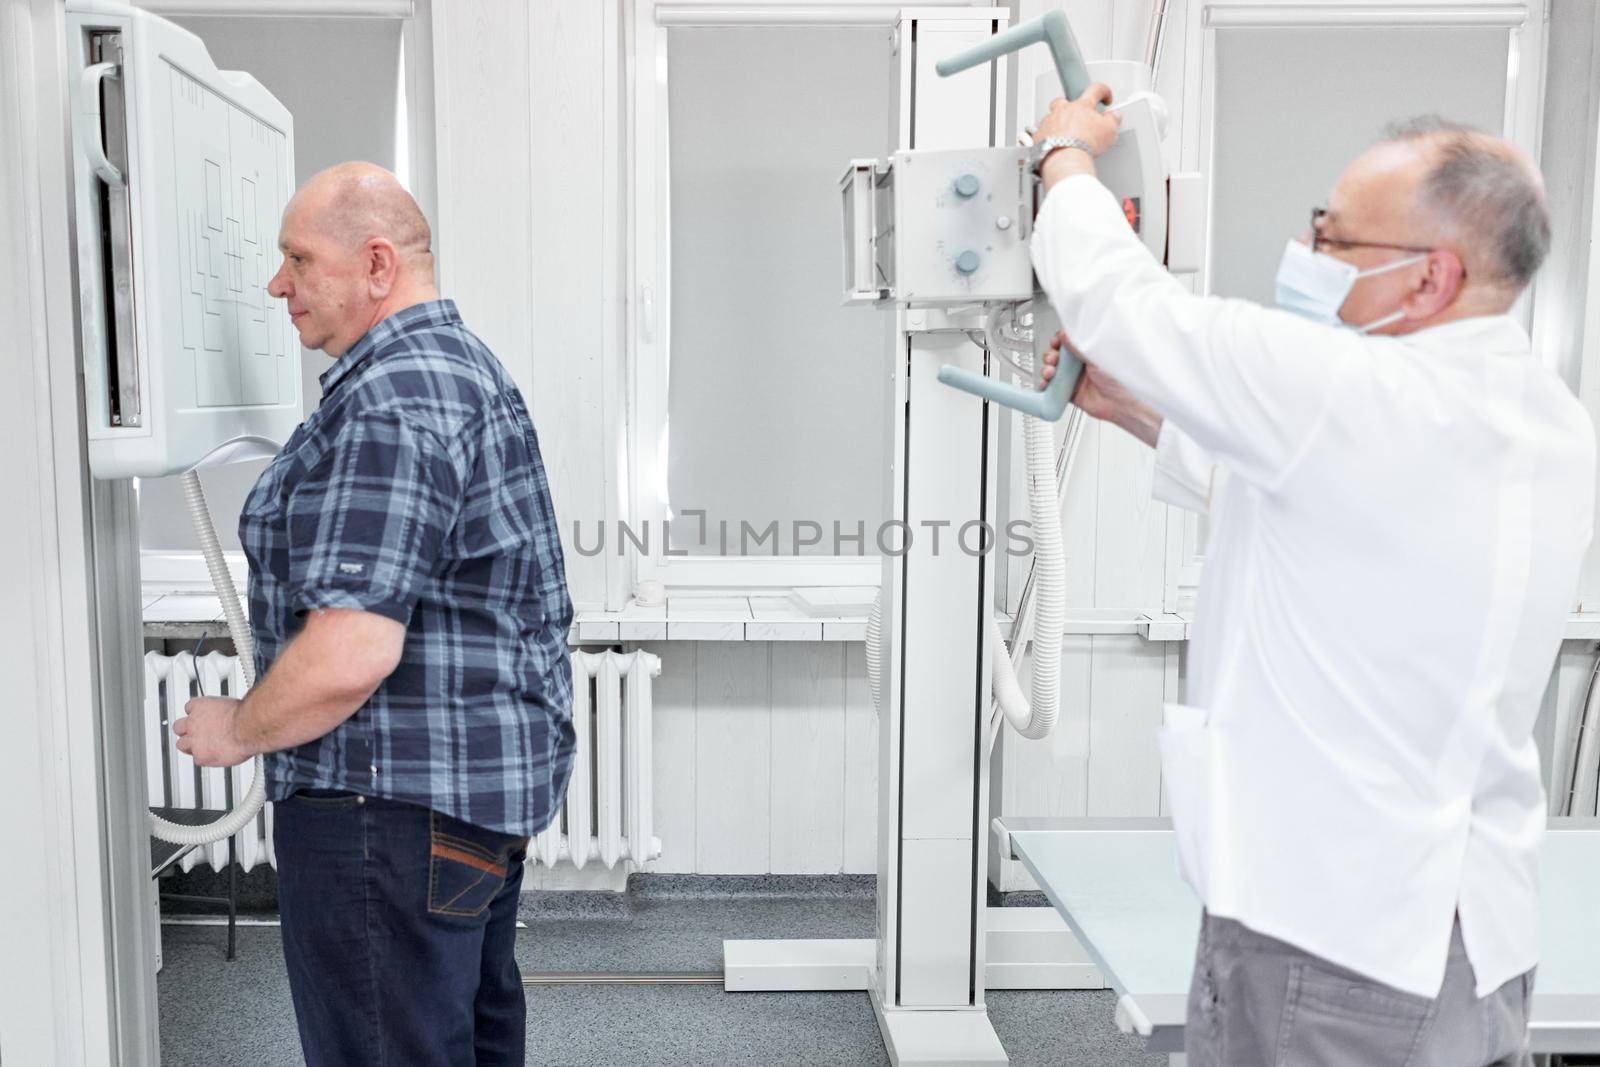 Doctor using a x-ray machine while a patient is standing in a hospital room